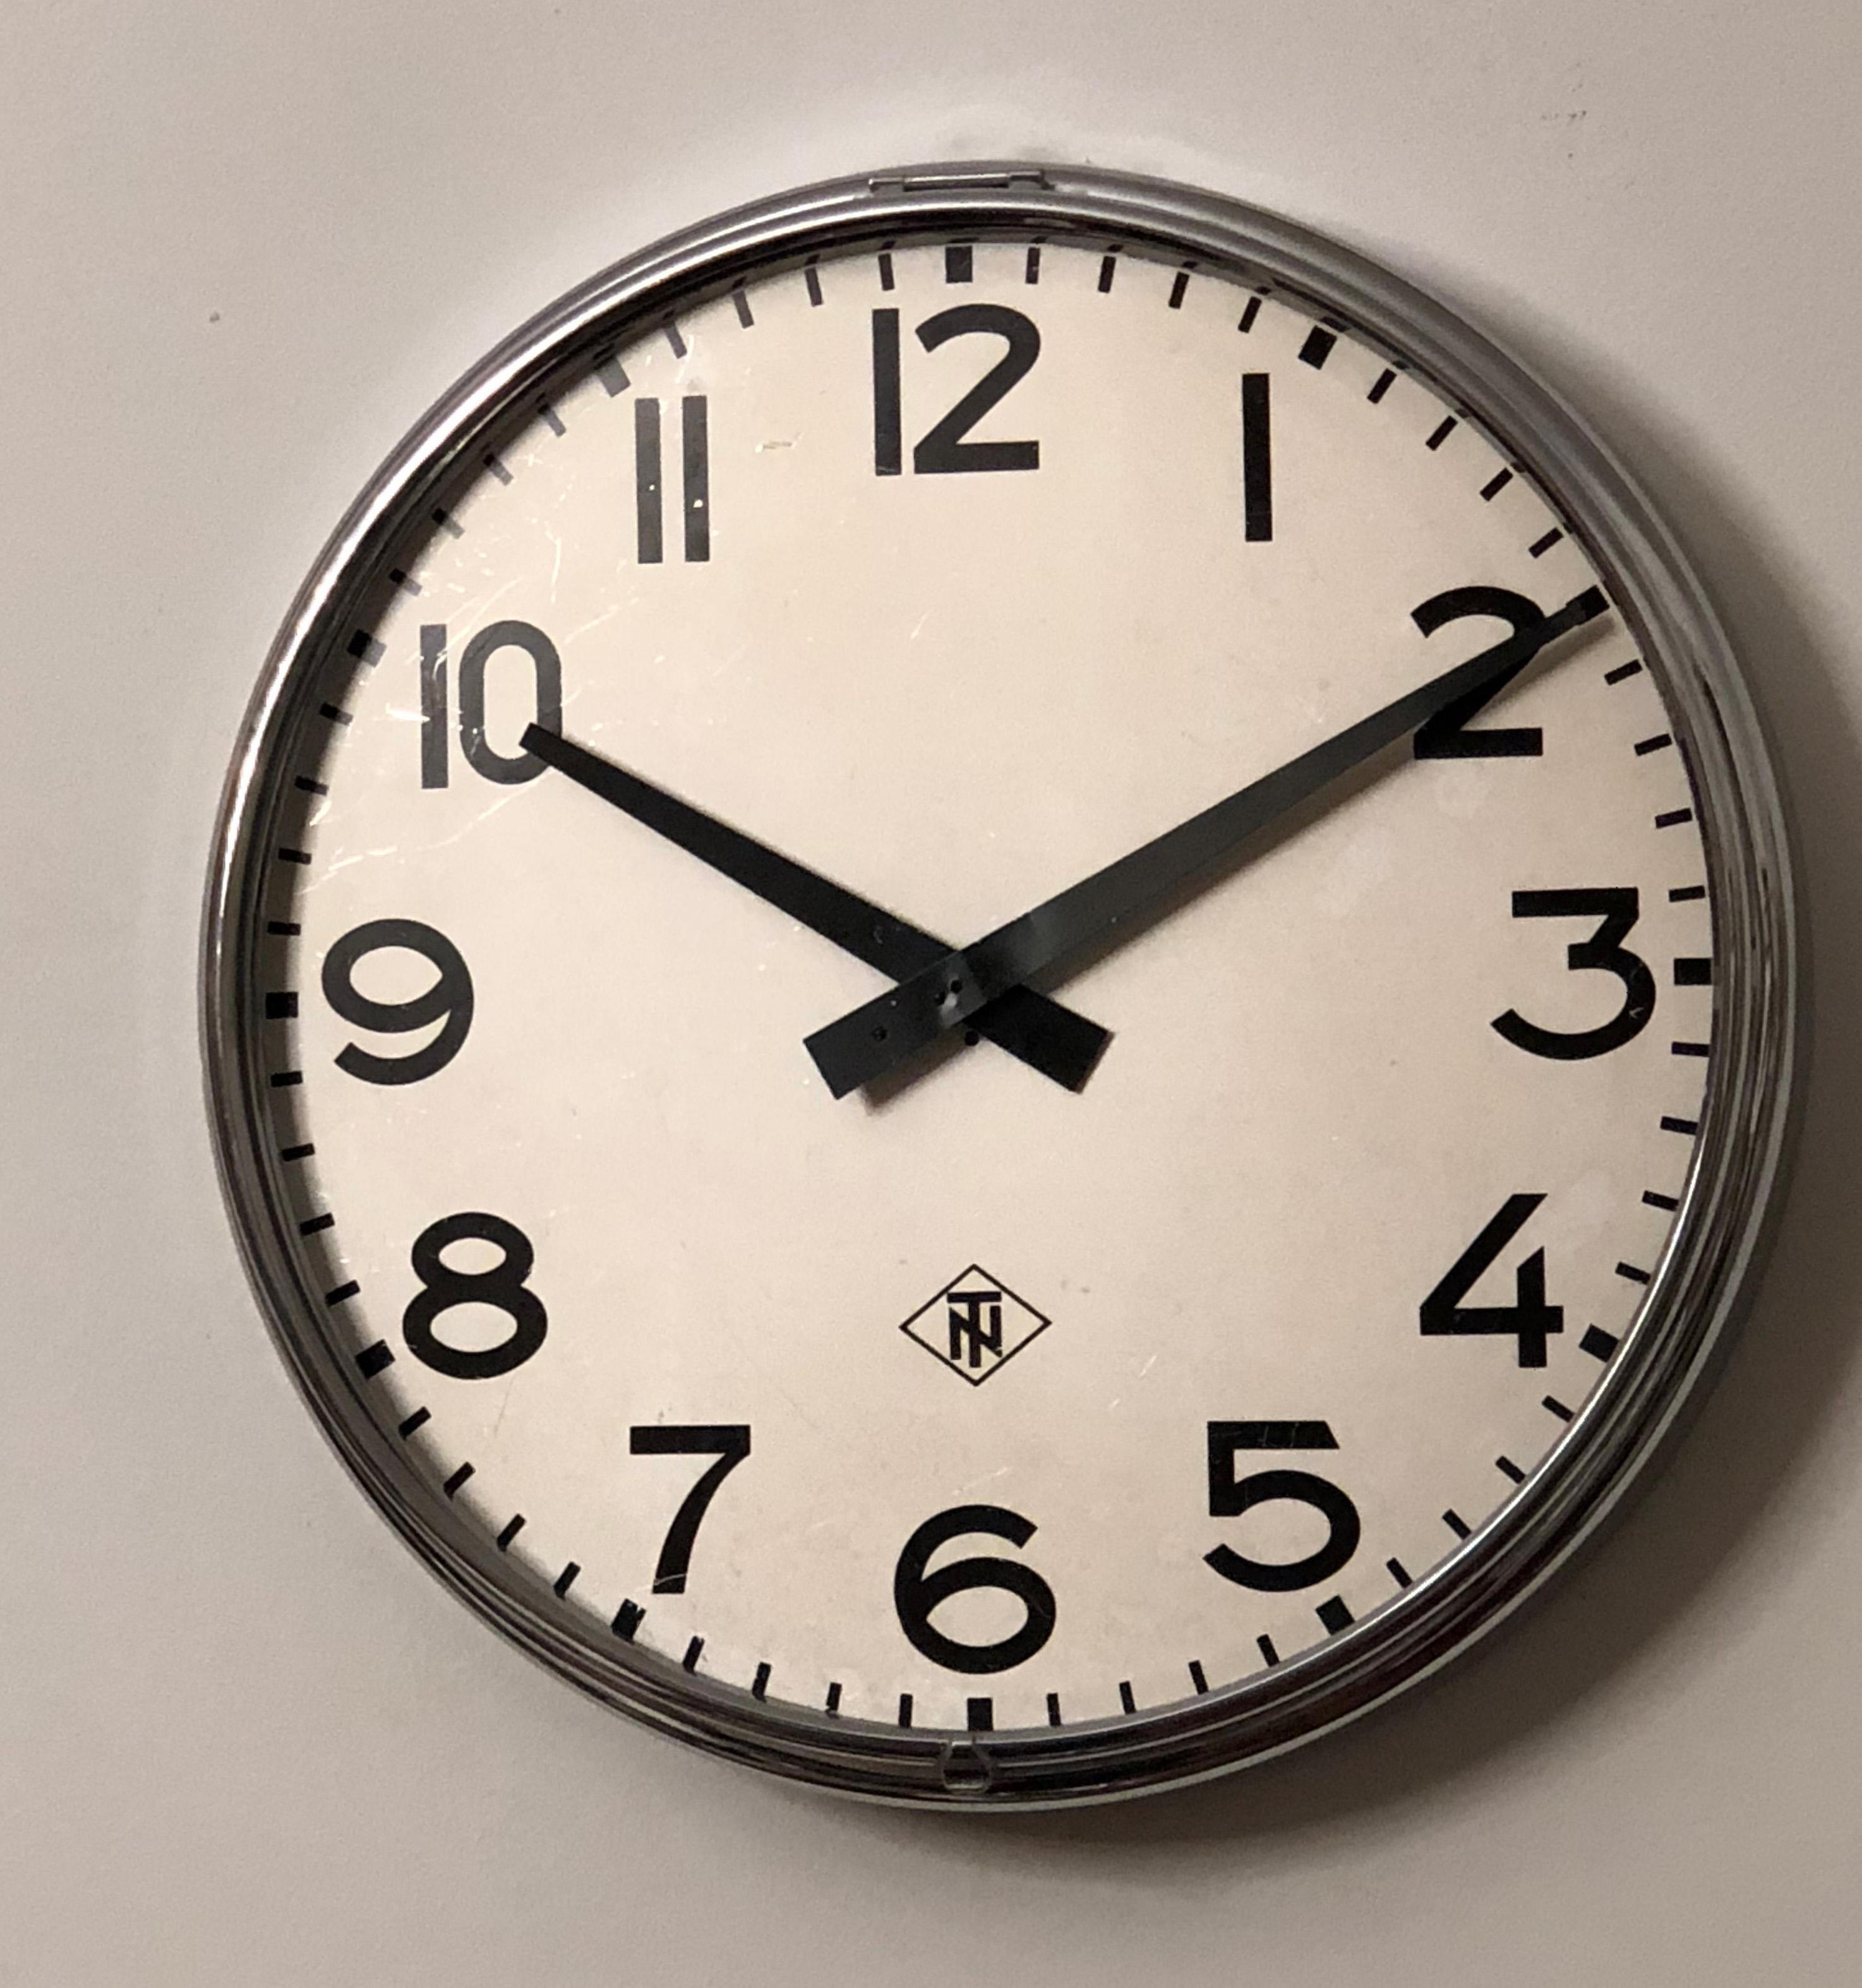 Steel frame painted with an aluminum clock face, clock hand and glass cover. Made in Germany in the late 1970s by TN (Telefonbau und Normalzeit). Formerly a slave clock, it is now fitted with a modern quartz movement with an AA battery. Used but in